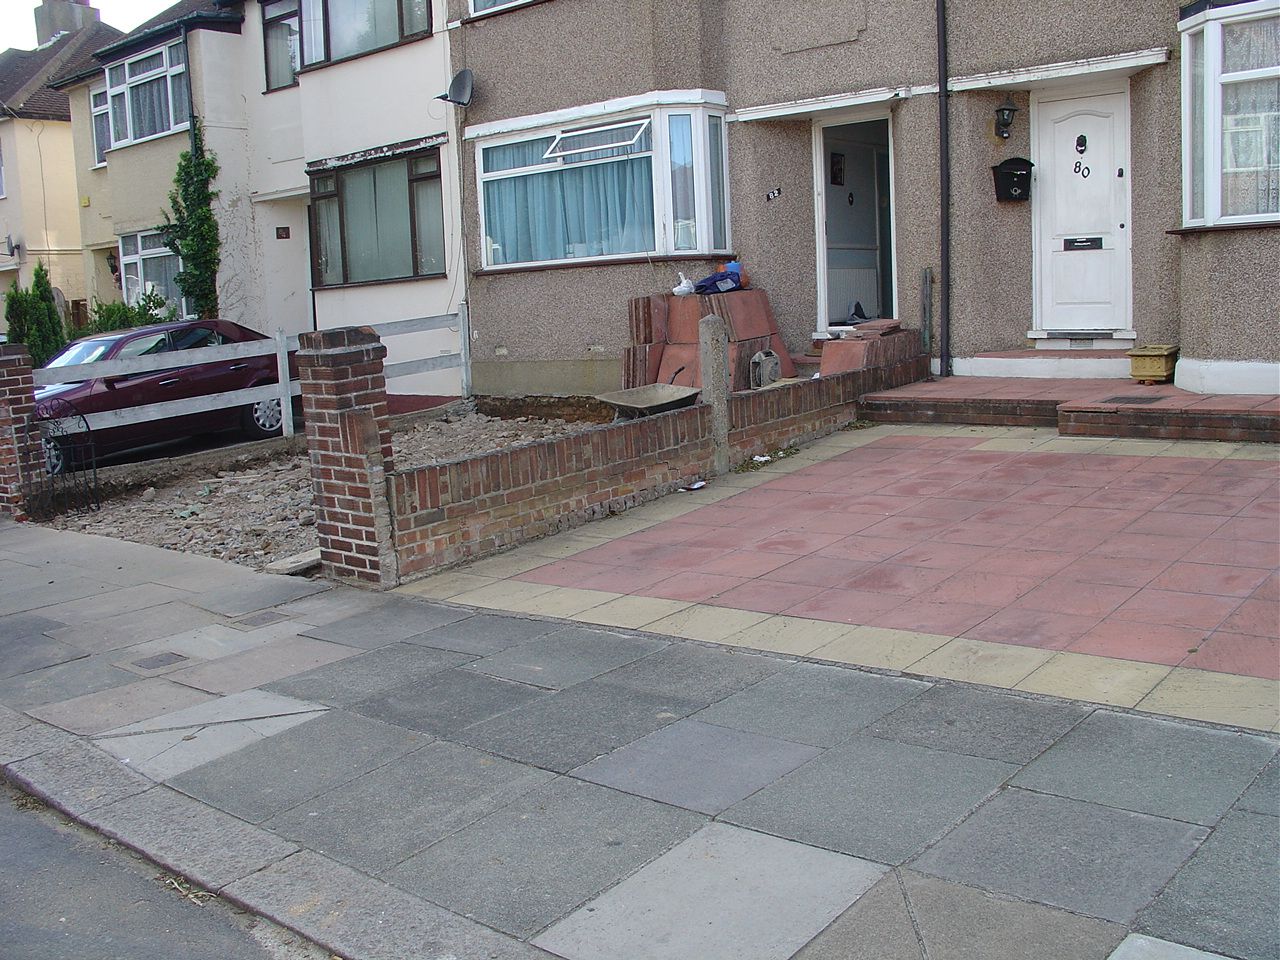 Photo of a totally paved front garden in Northolt, with no plants at all,  no provision for run-off so adds to flood risk (rain runs straight into the road) and lack of wall removes privacy  